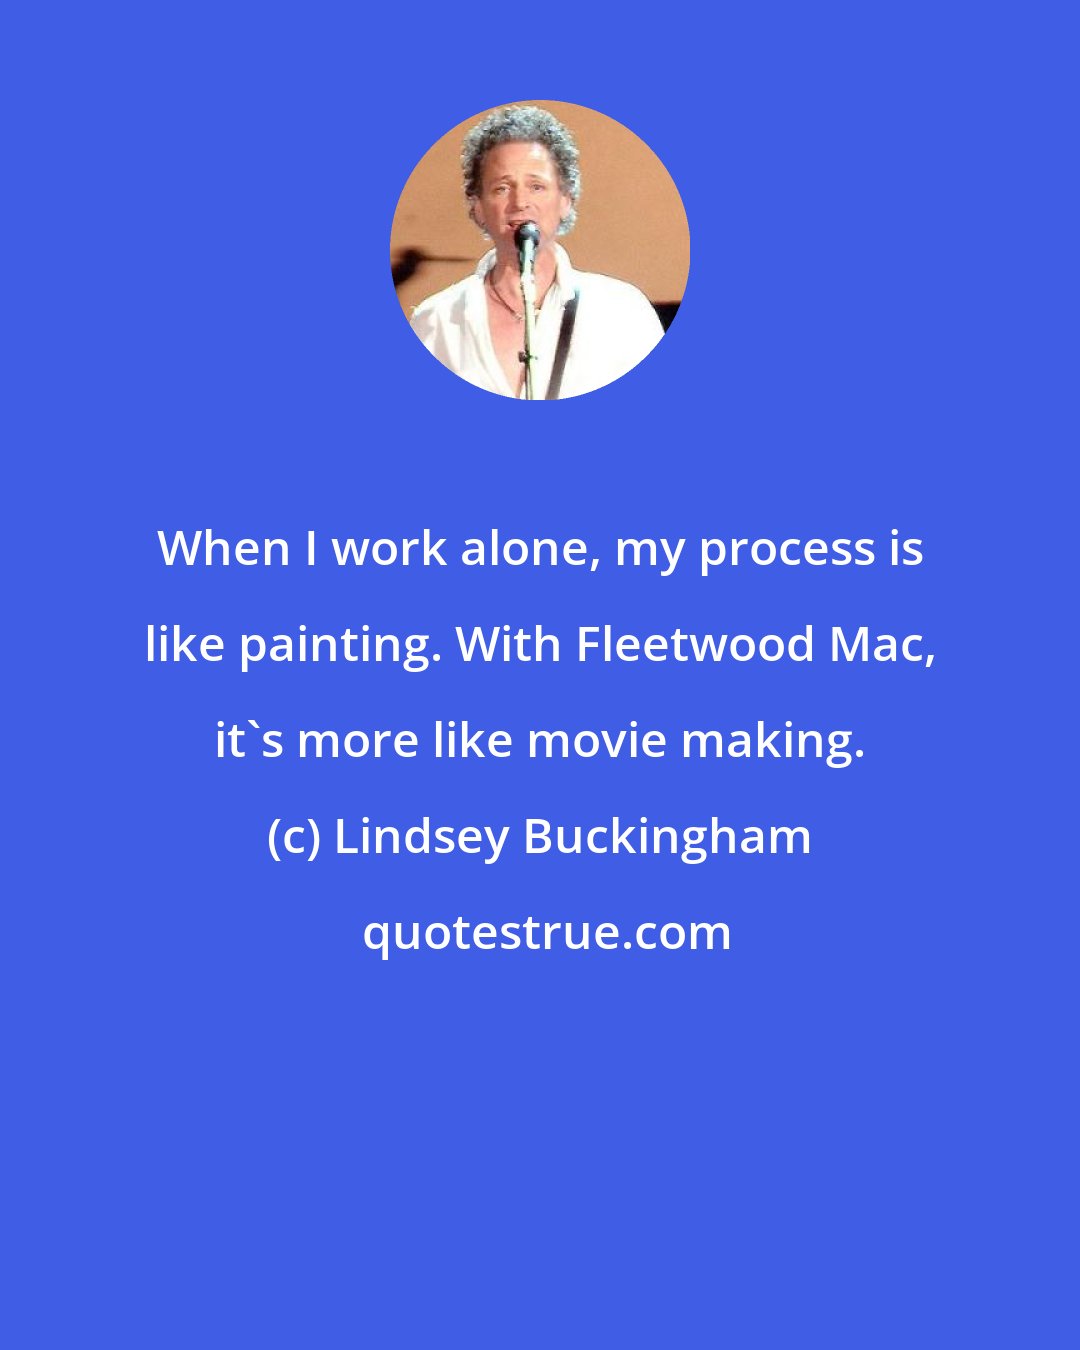 Lindsey Buckingham: When I work alone, my process is like painting. With Fleetwood Mac, it's more like movie making.